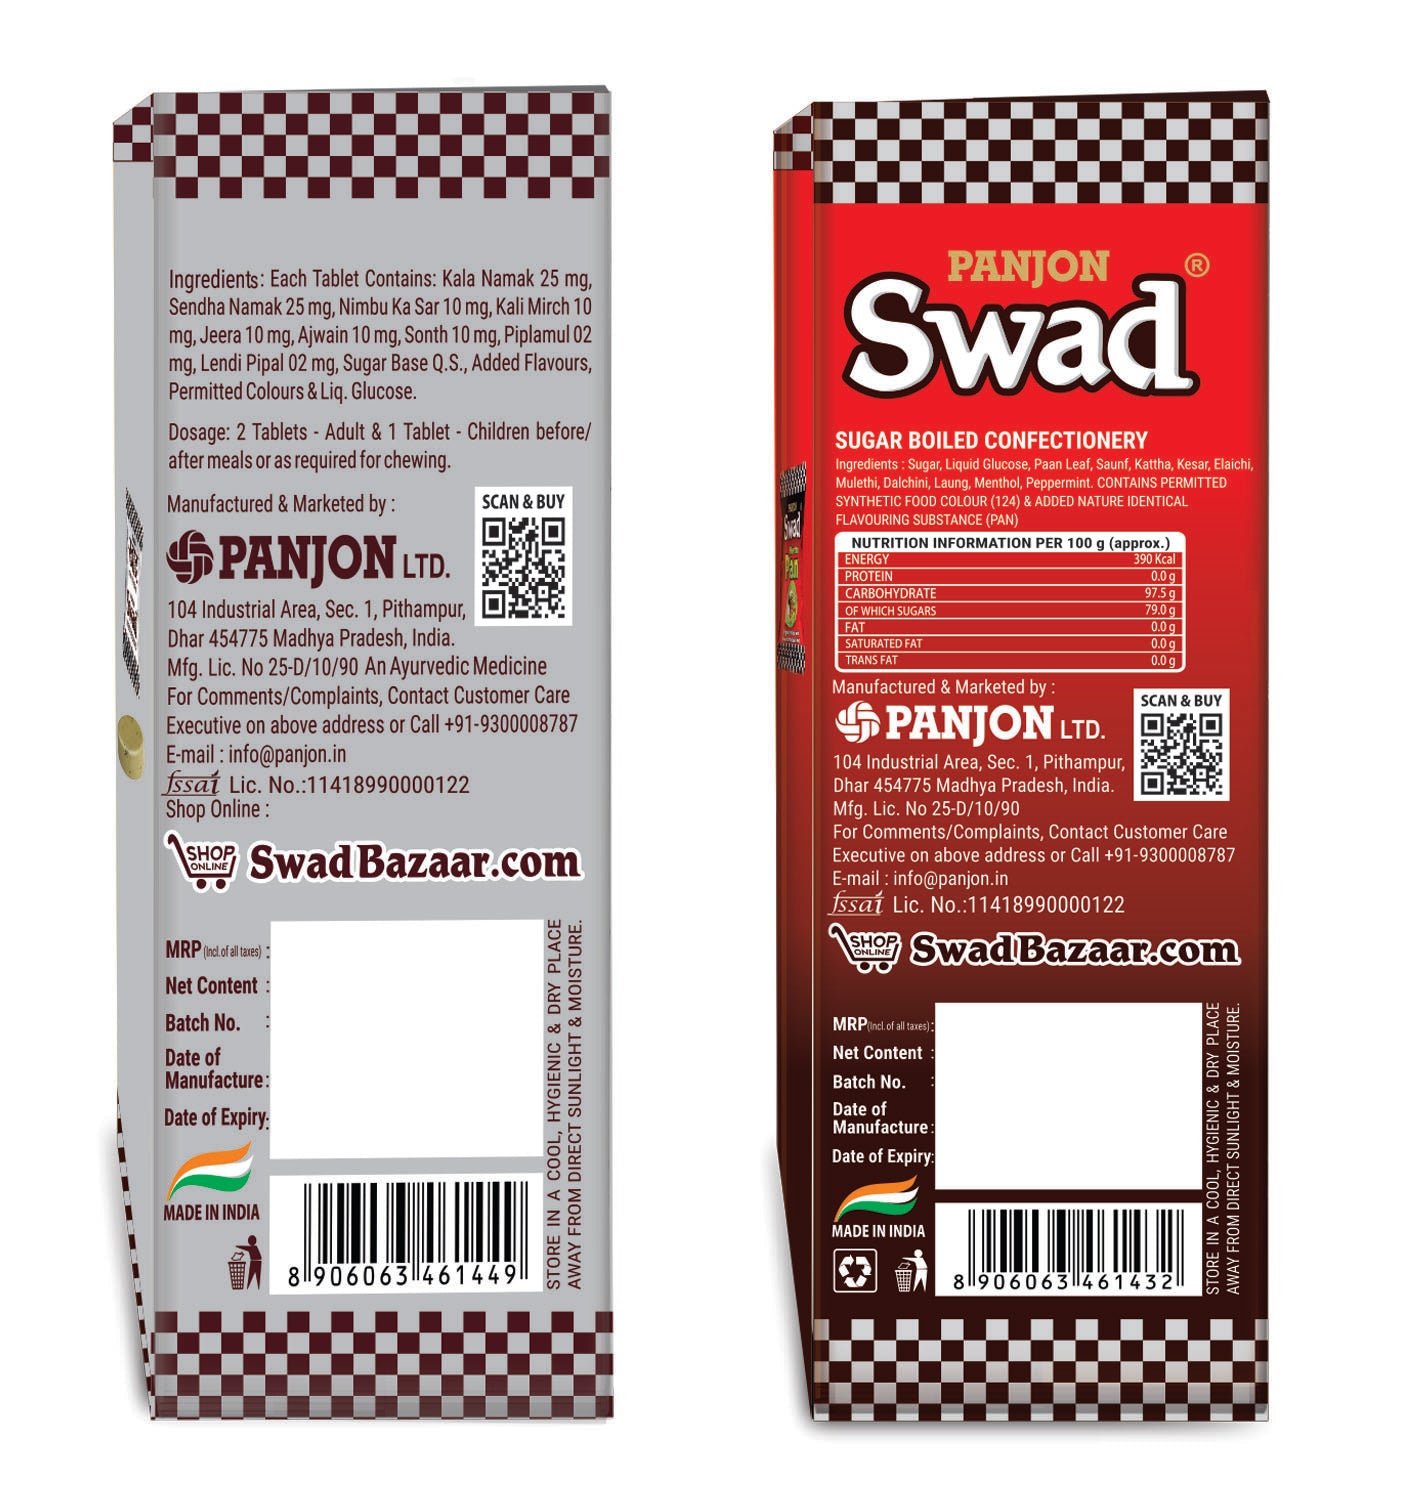 Swad Candy Gift Box (Regular Digestive & Meetha Pan Flavour) 125 Toffee x 2 Box Pack